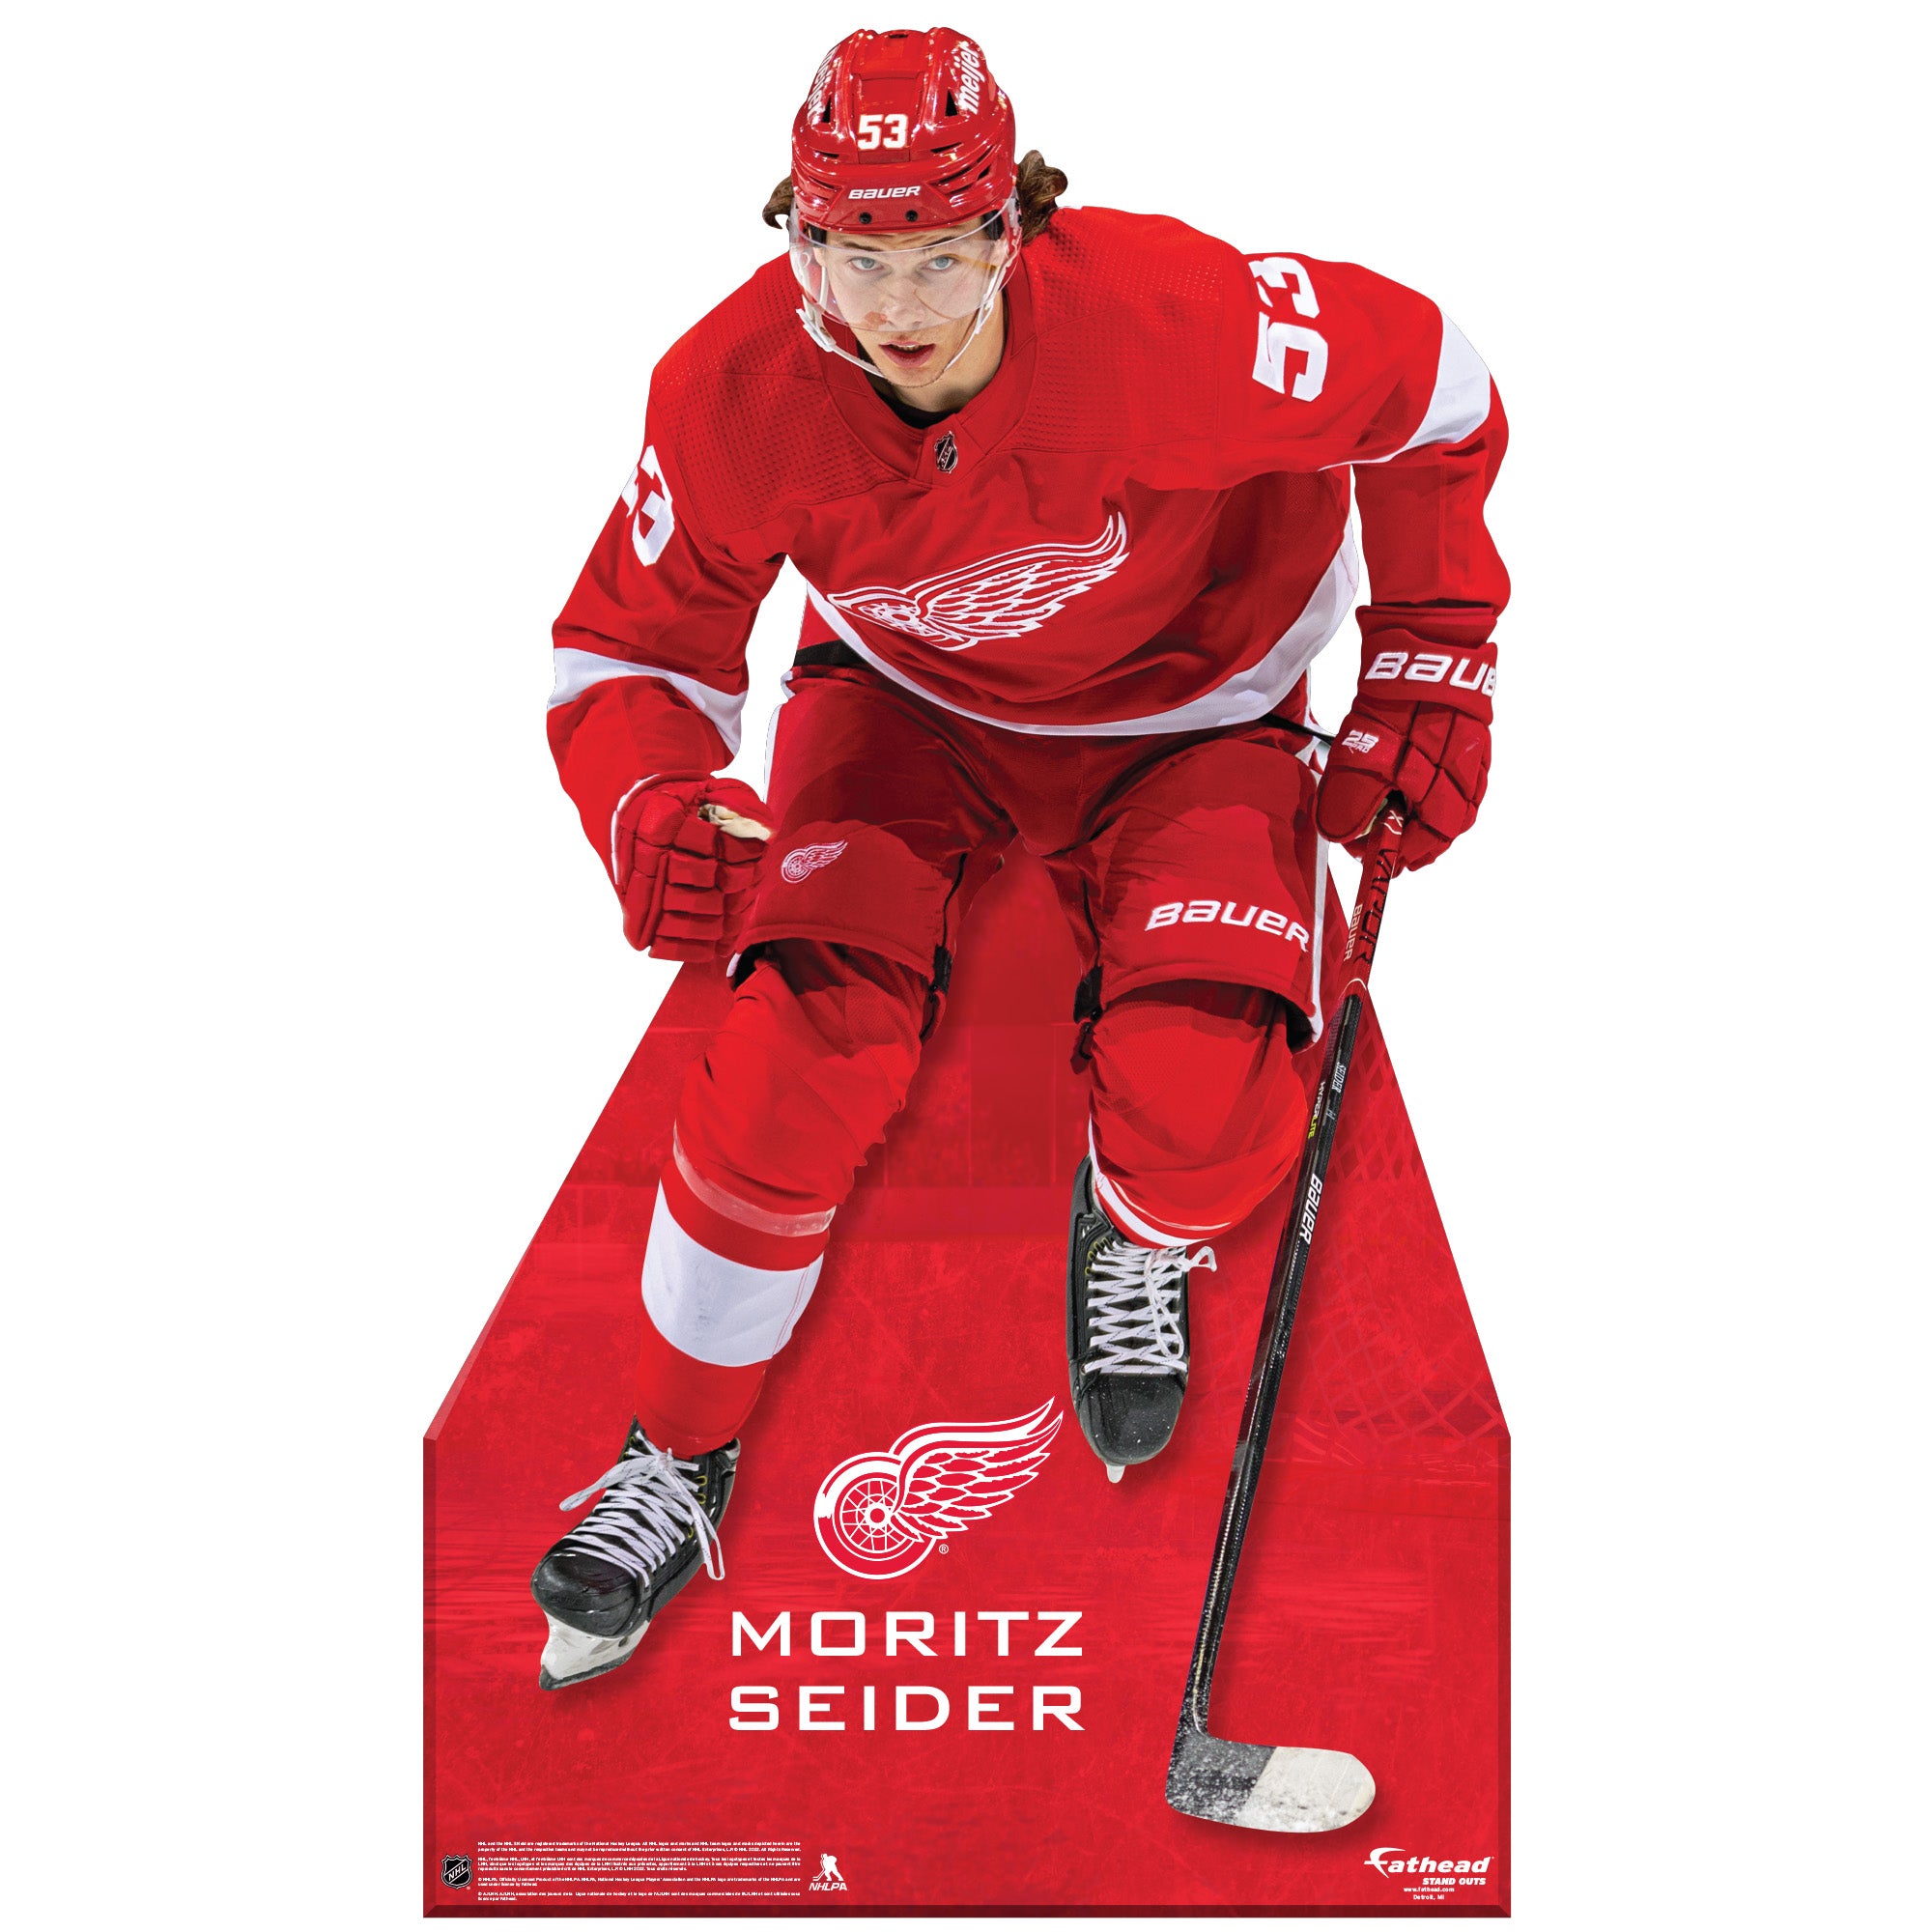 Detroit Red Wings on X: Who needs a Halloween costume idea